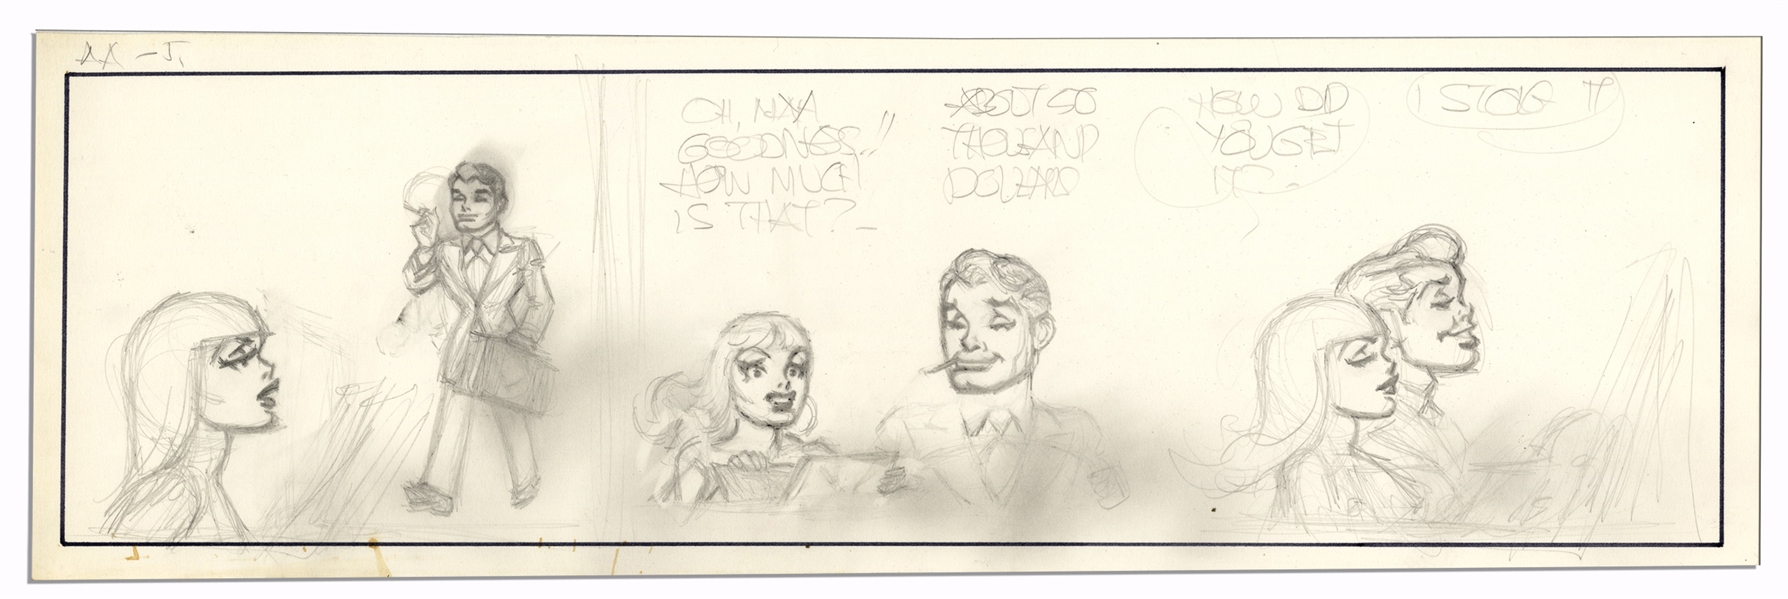 Unfinished Comic Strip by Al Capp in Pencil -- Undated & Untitled -- 19.75'' x 6.25'' -- Very Good -- From the Al Capp Estate